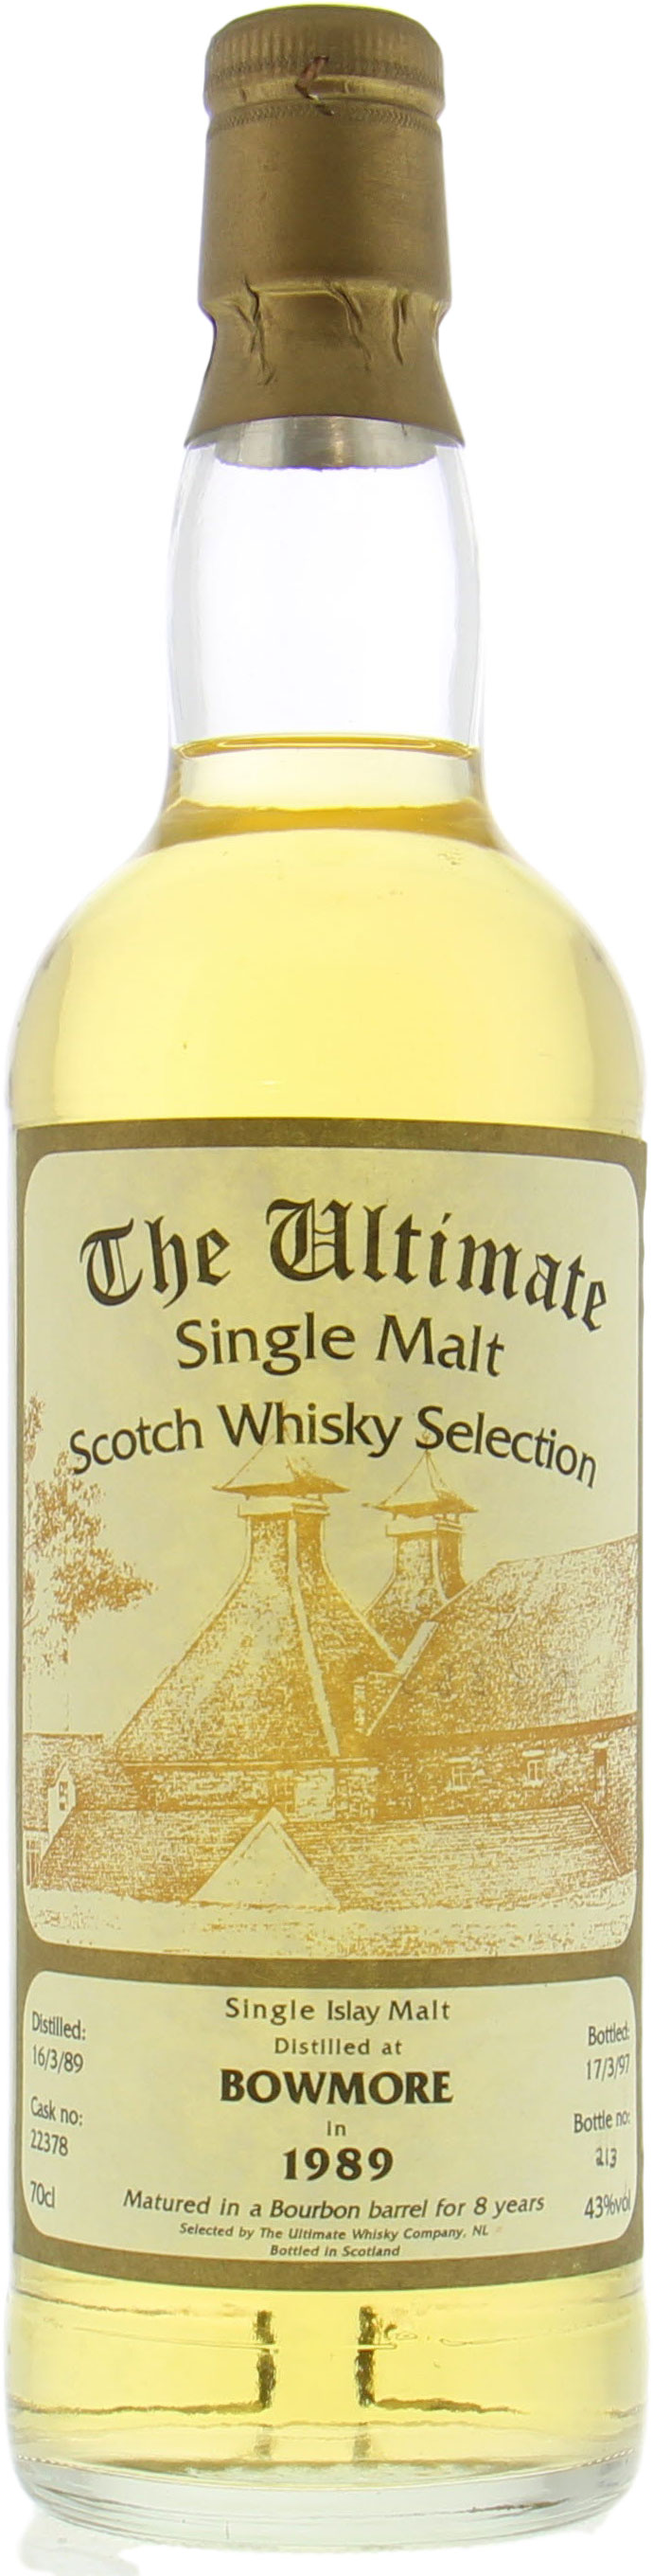 Bowmore - 1989 The Ultimate Cask 22378 43% 1989